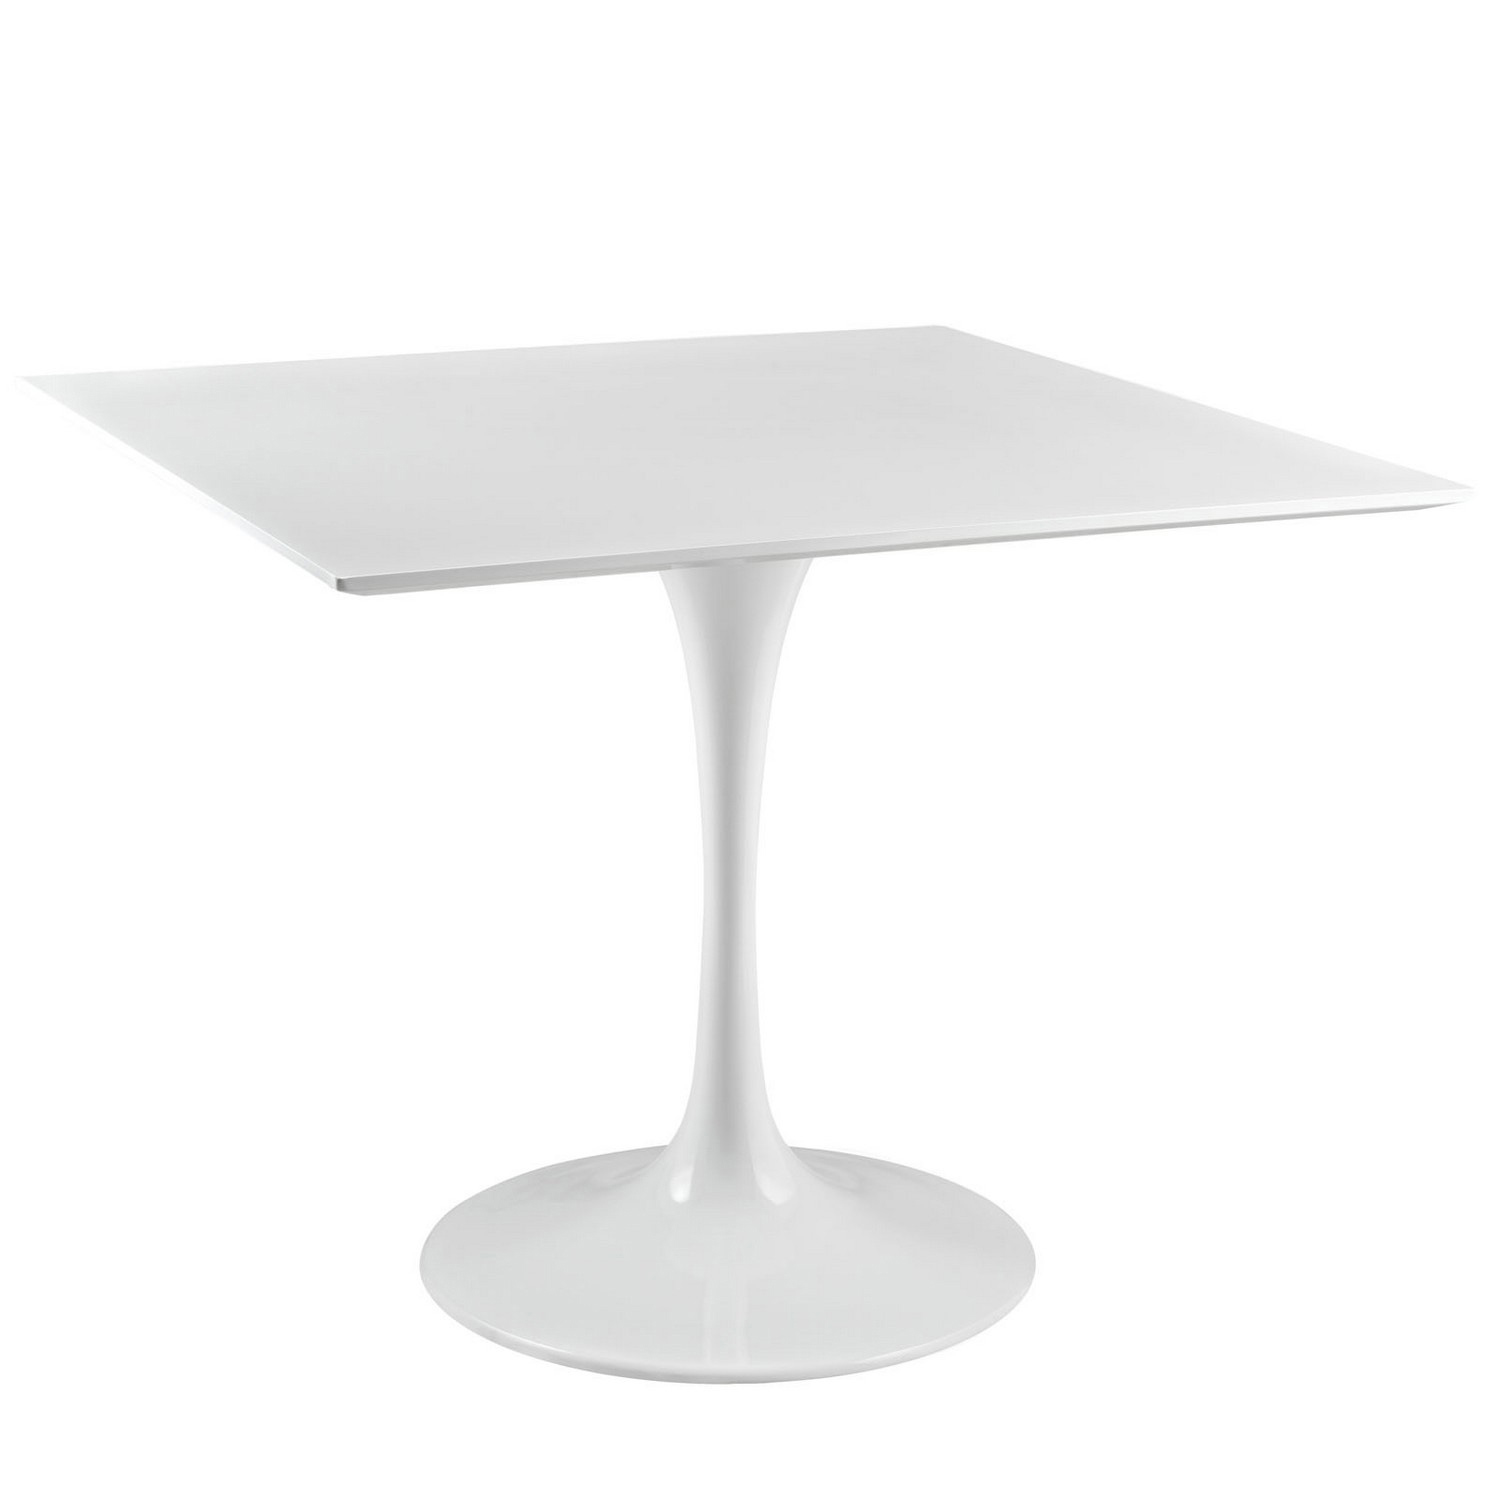 Modway Lippa 36 Square Wood Top Dining Table - White